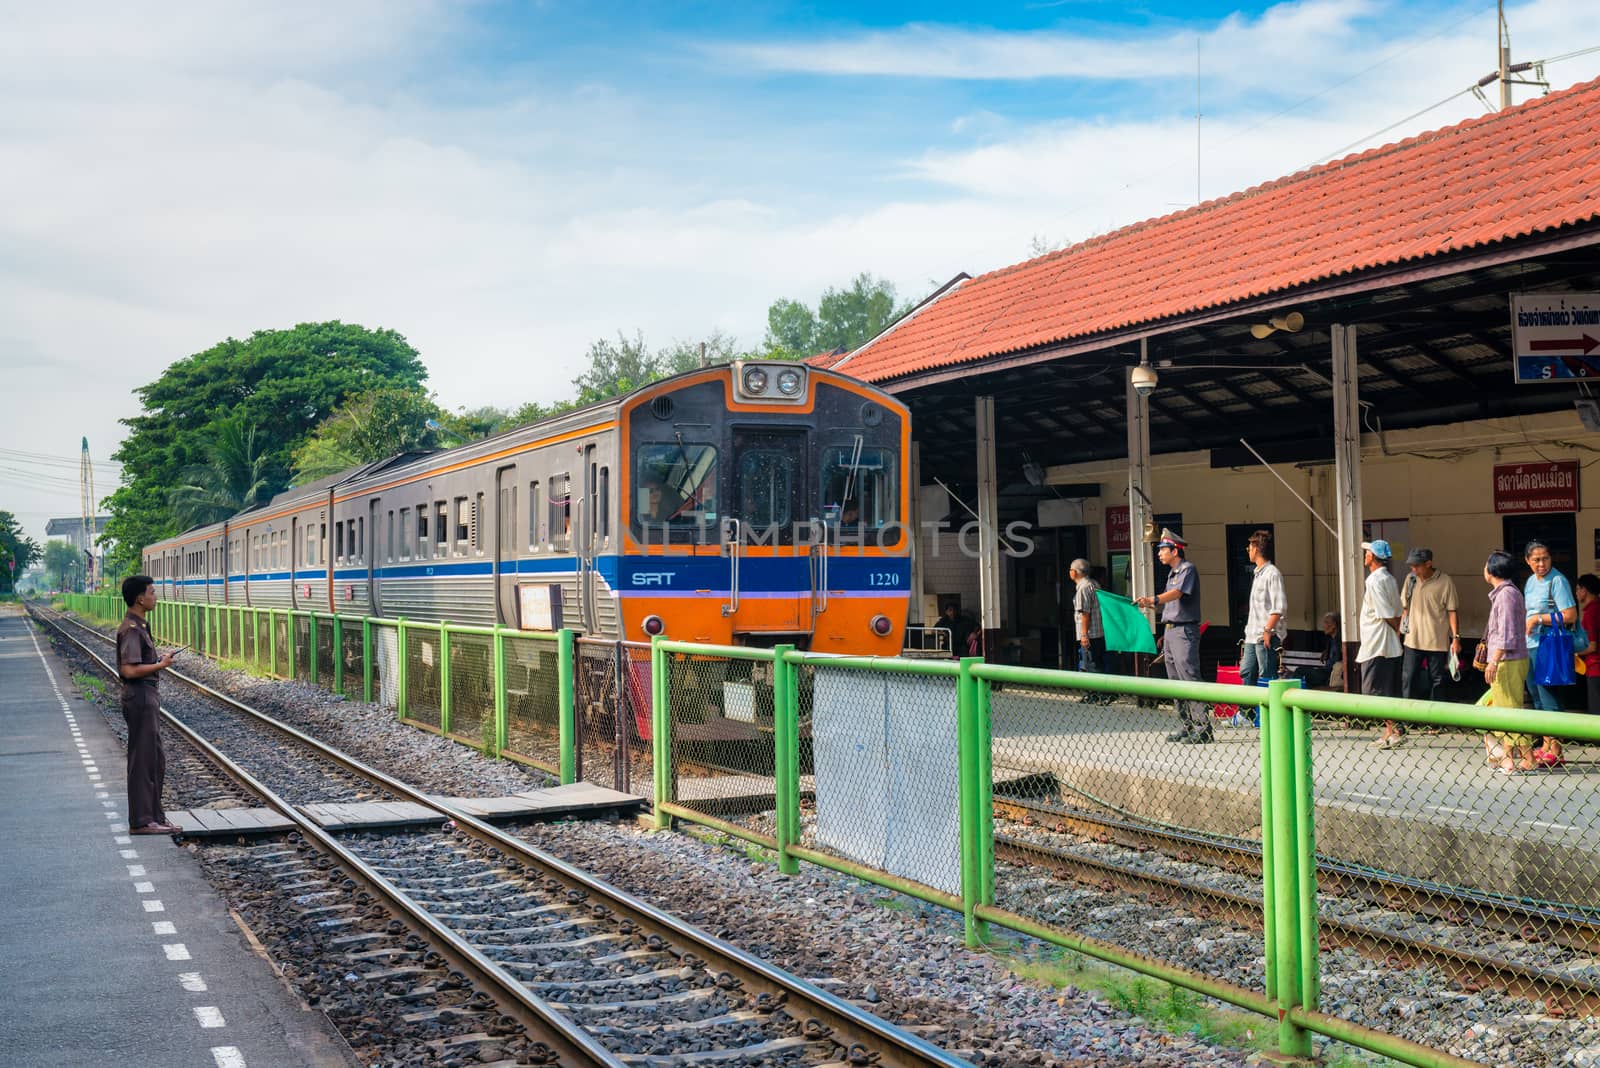 DONG MUEANG, THAILAND - 21 NOV 2013: Locomotive with train arrives at railway station with people on outdoor platforms